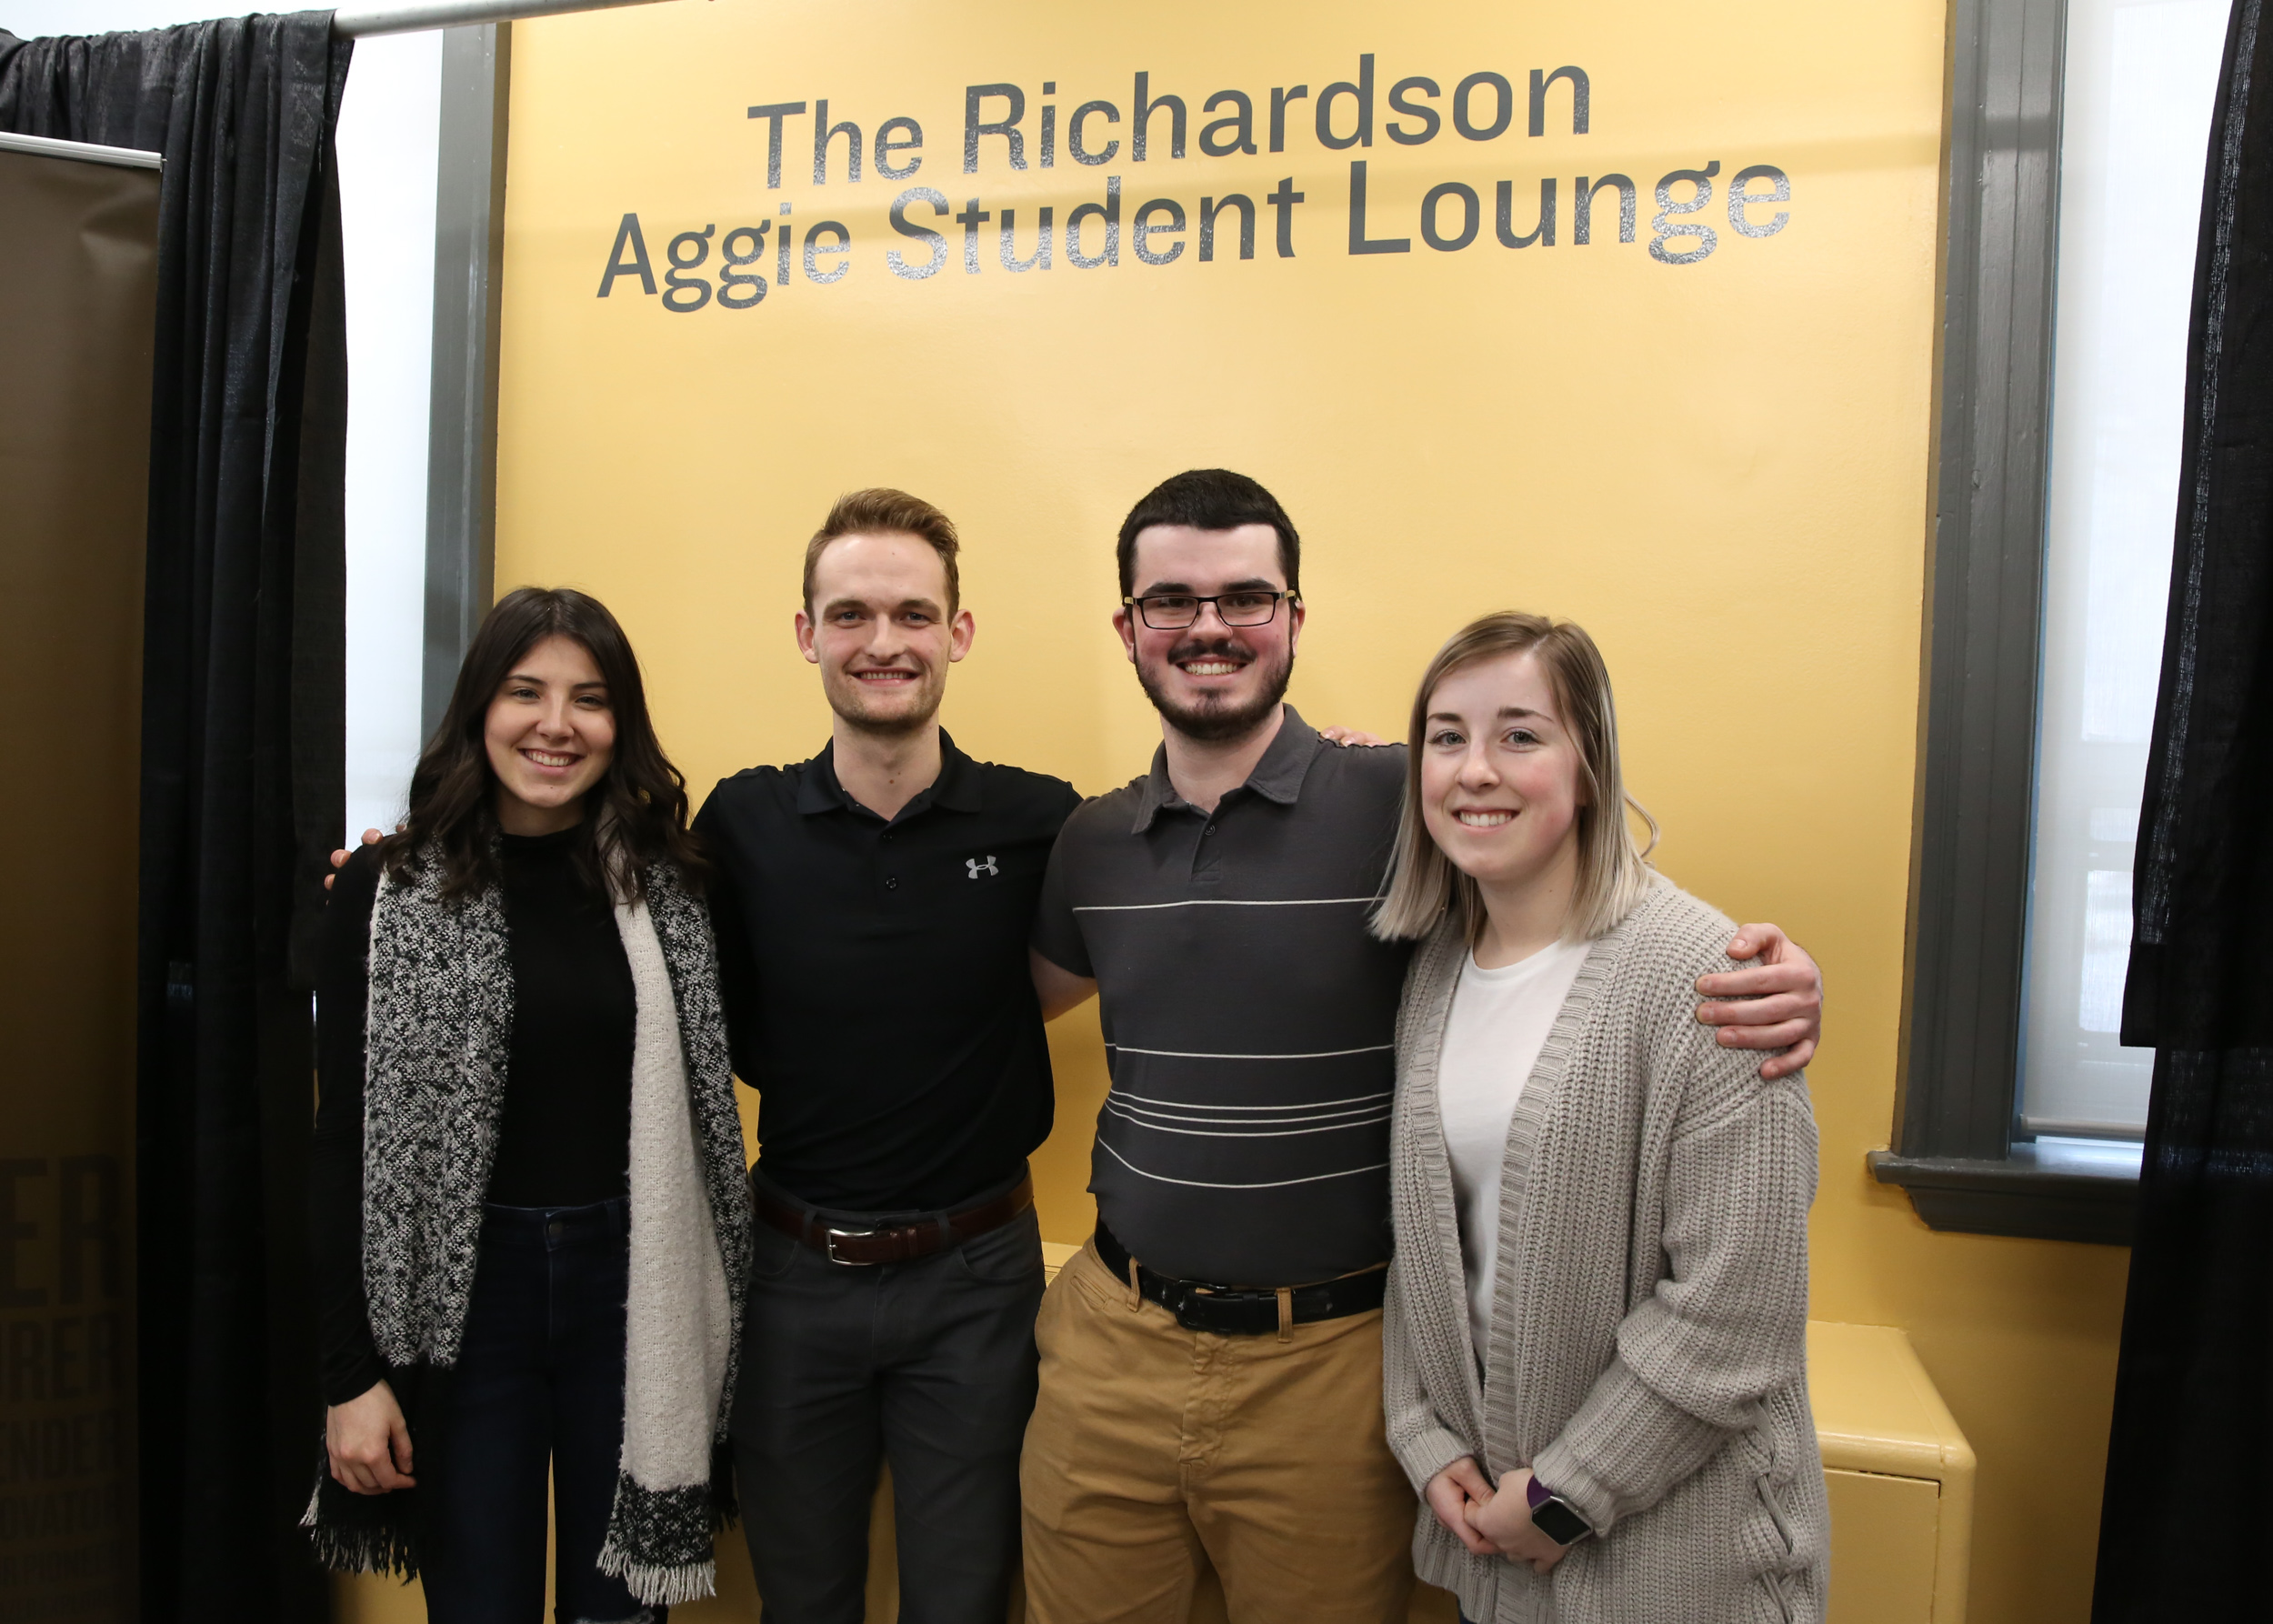 Student lounge renovation committee members Jenna, Brian, Pat and Courtney enjoy the new space